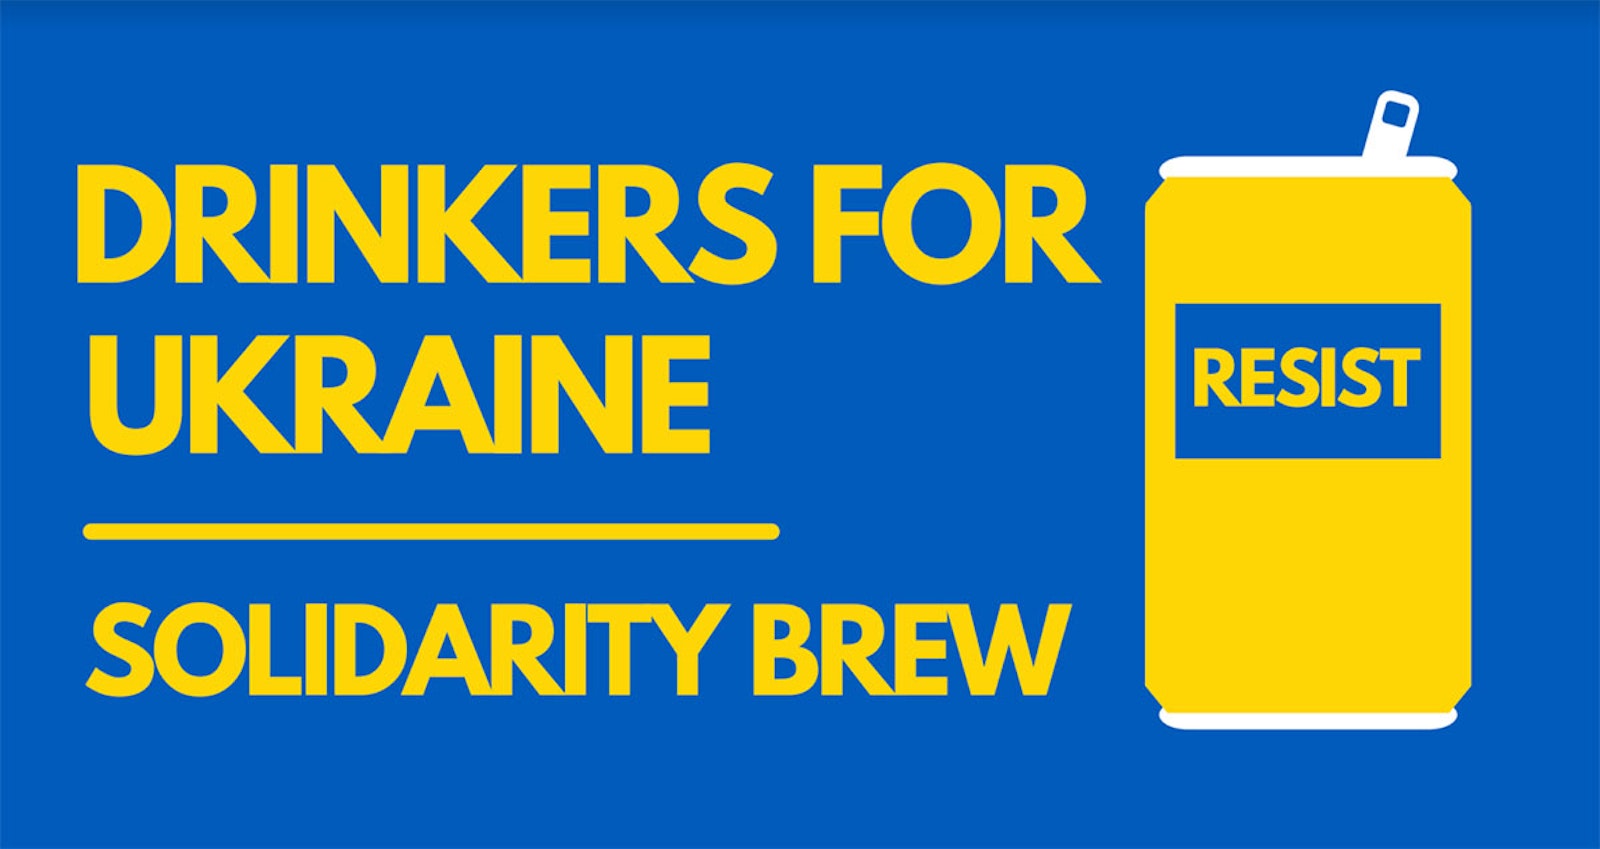 Campaign Invites Brewers Worldwide To Brew In Solidarity With Ukraine Brewing Industry Guide